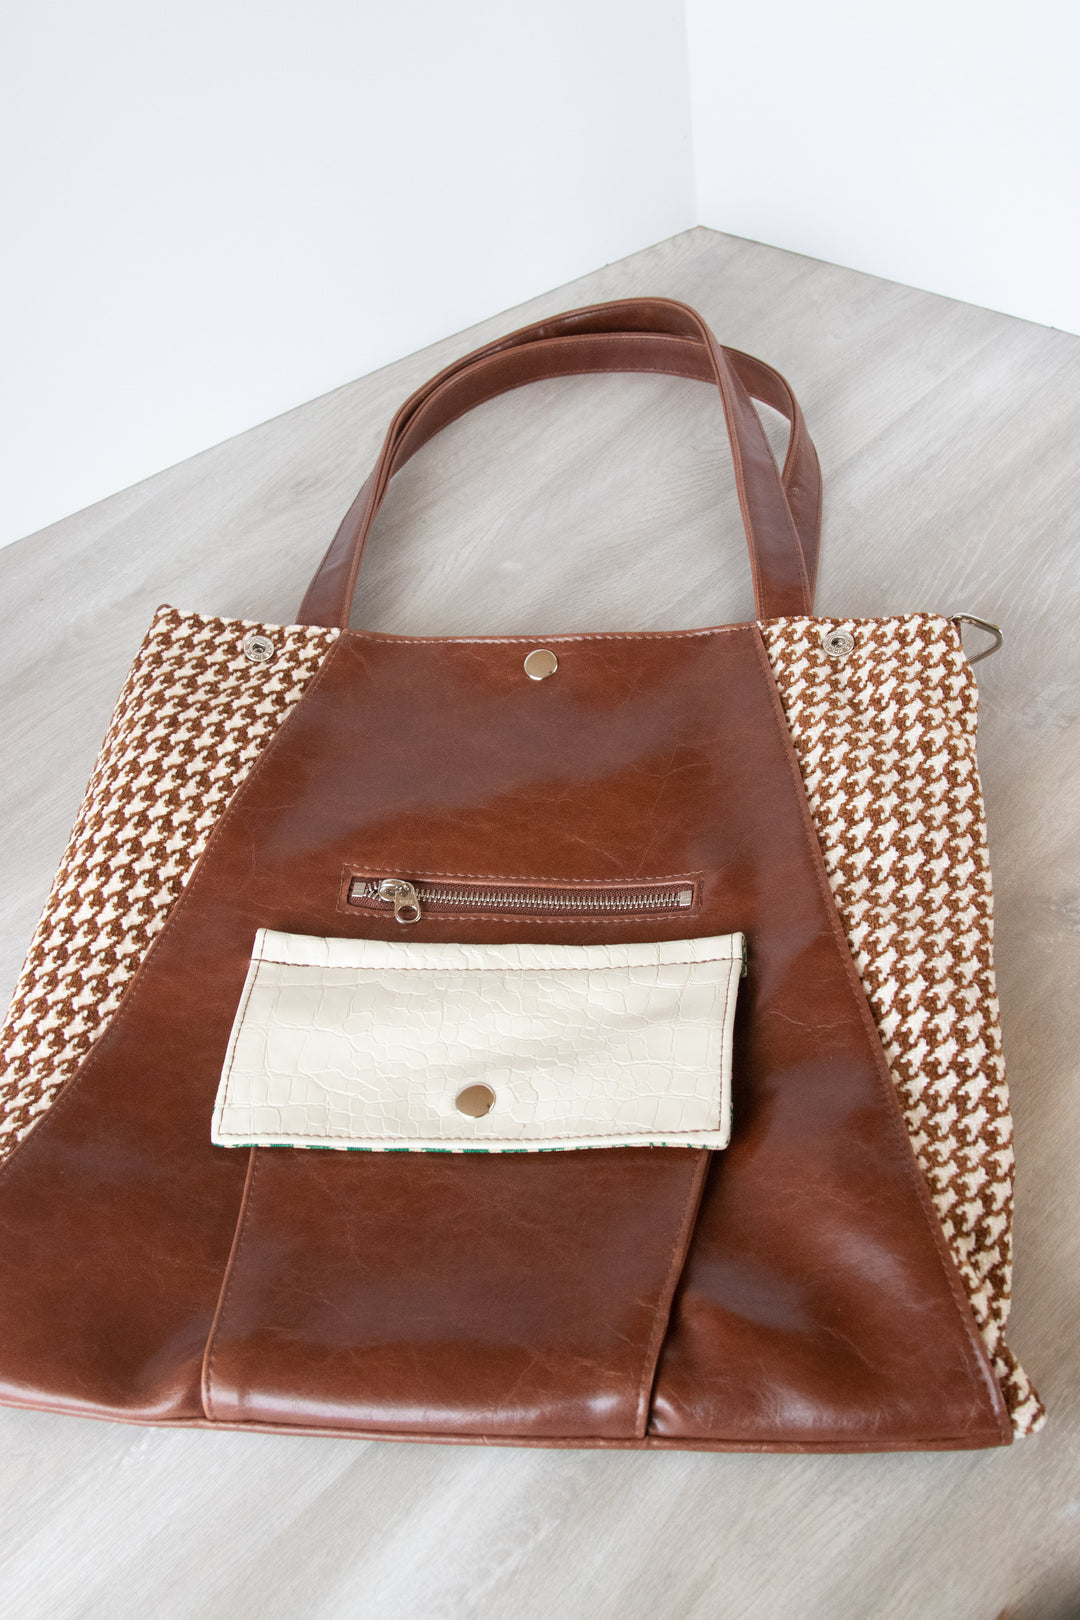 Metier Tote - Brown Houndstooth Chenille Vintage Fabric